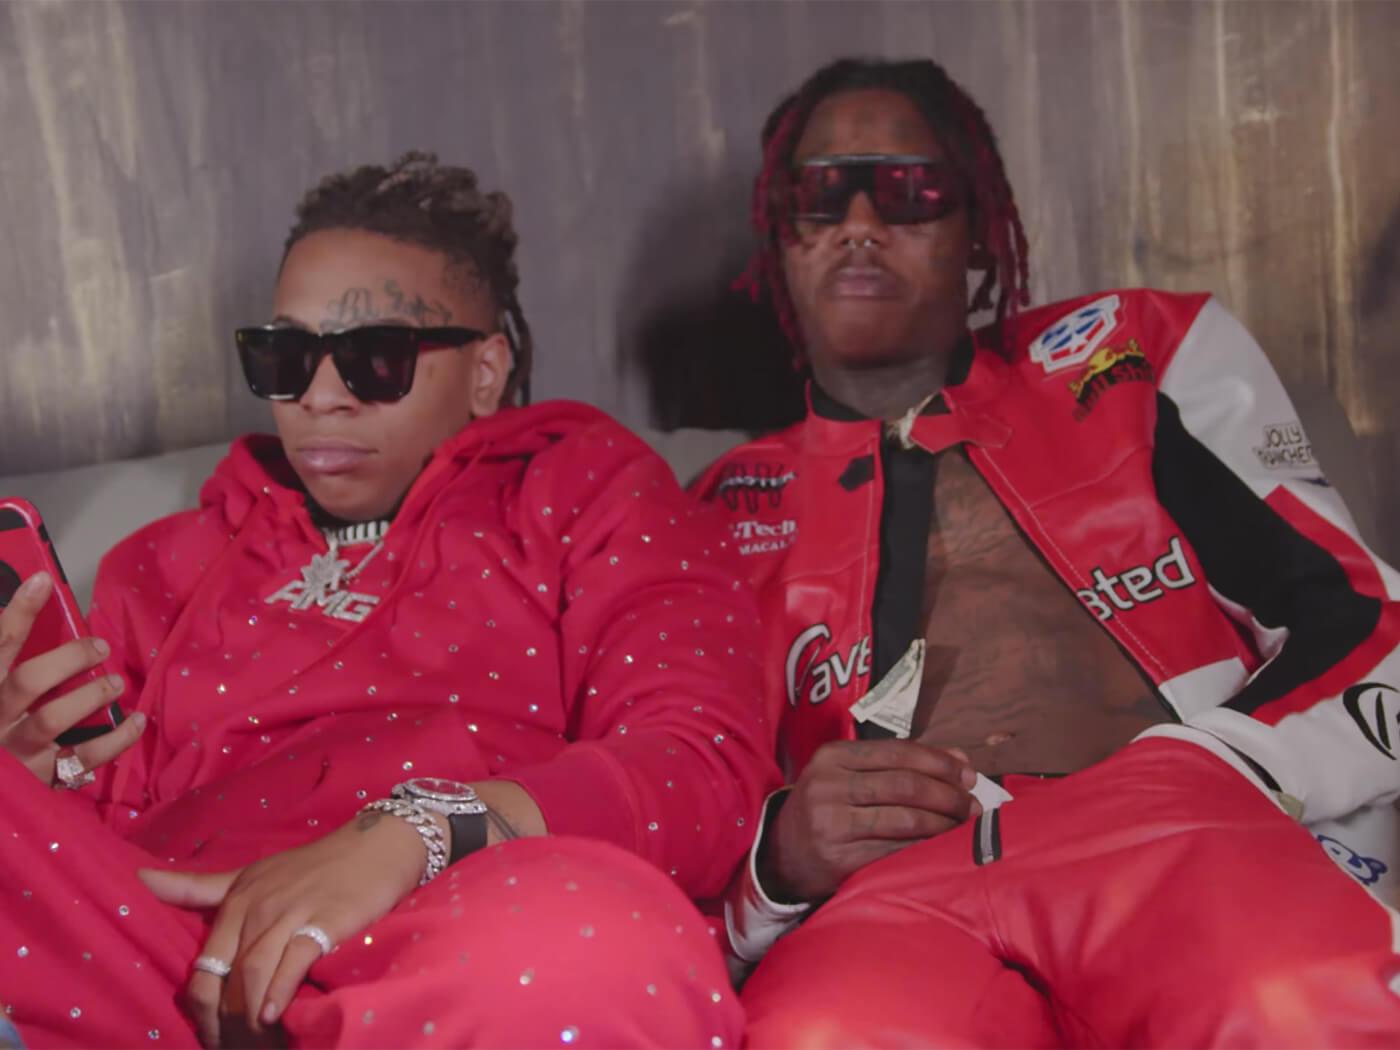 Famous Dex, Lil Gotit are “Fully Loaded” in new MV